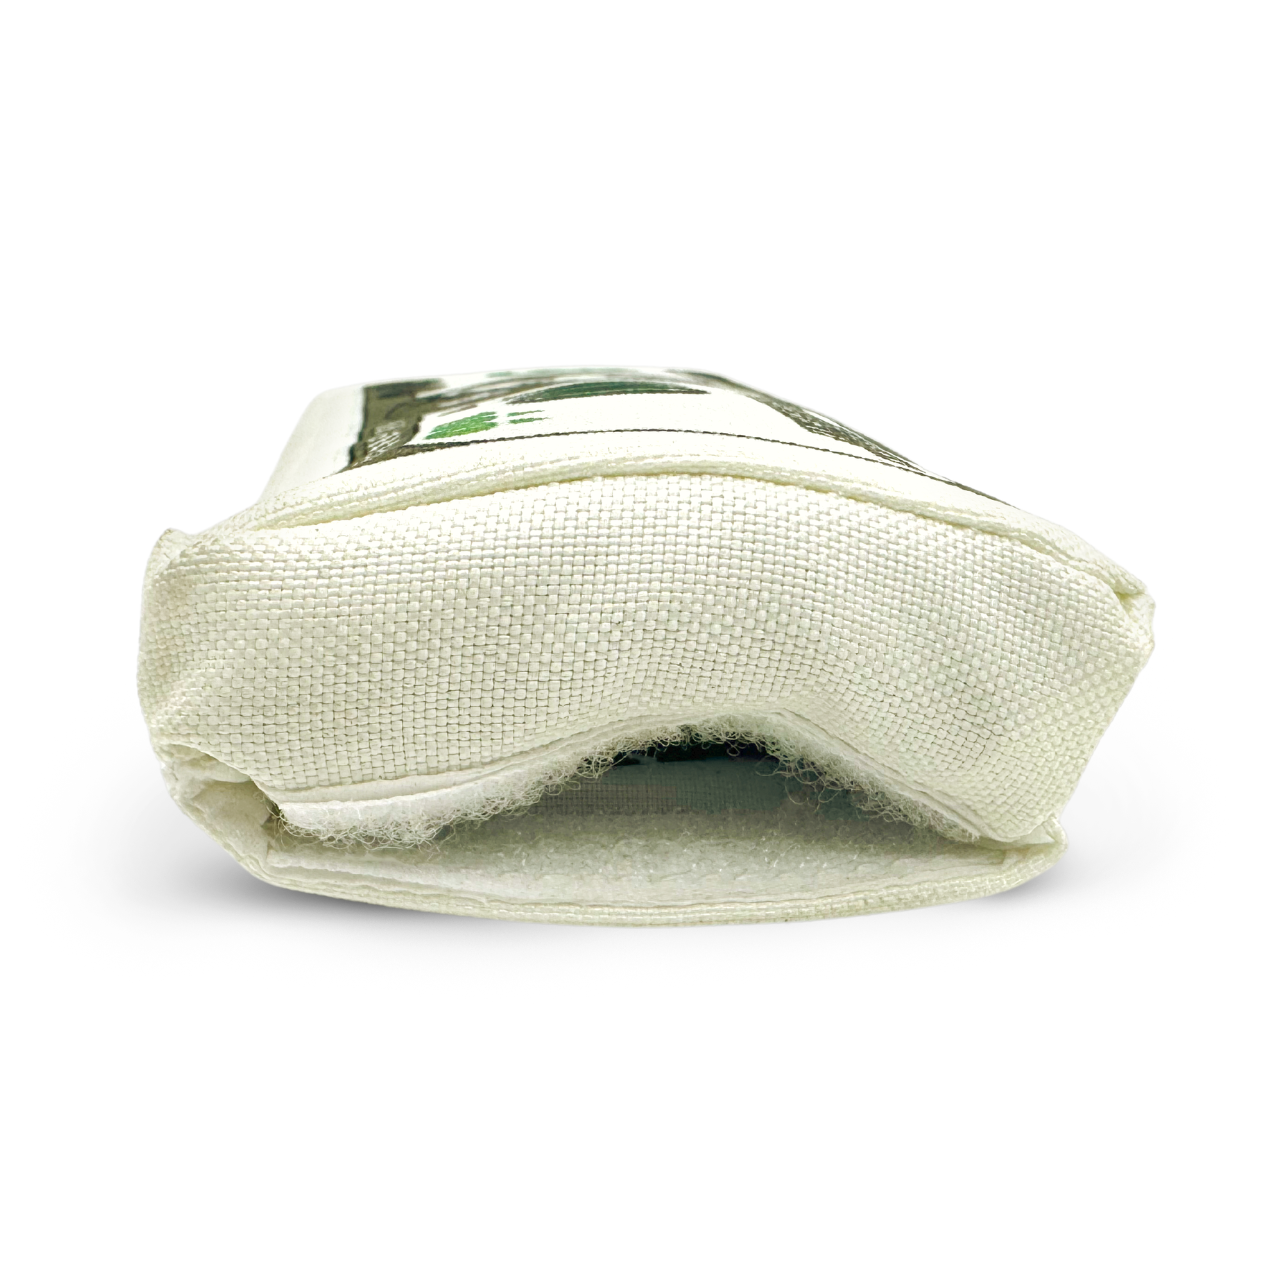 MyMeow Hundred Meows Catnip Toy with Refillable Pocket